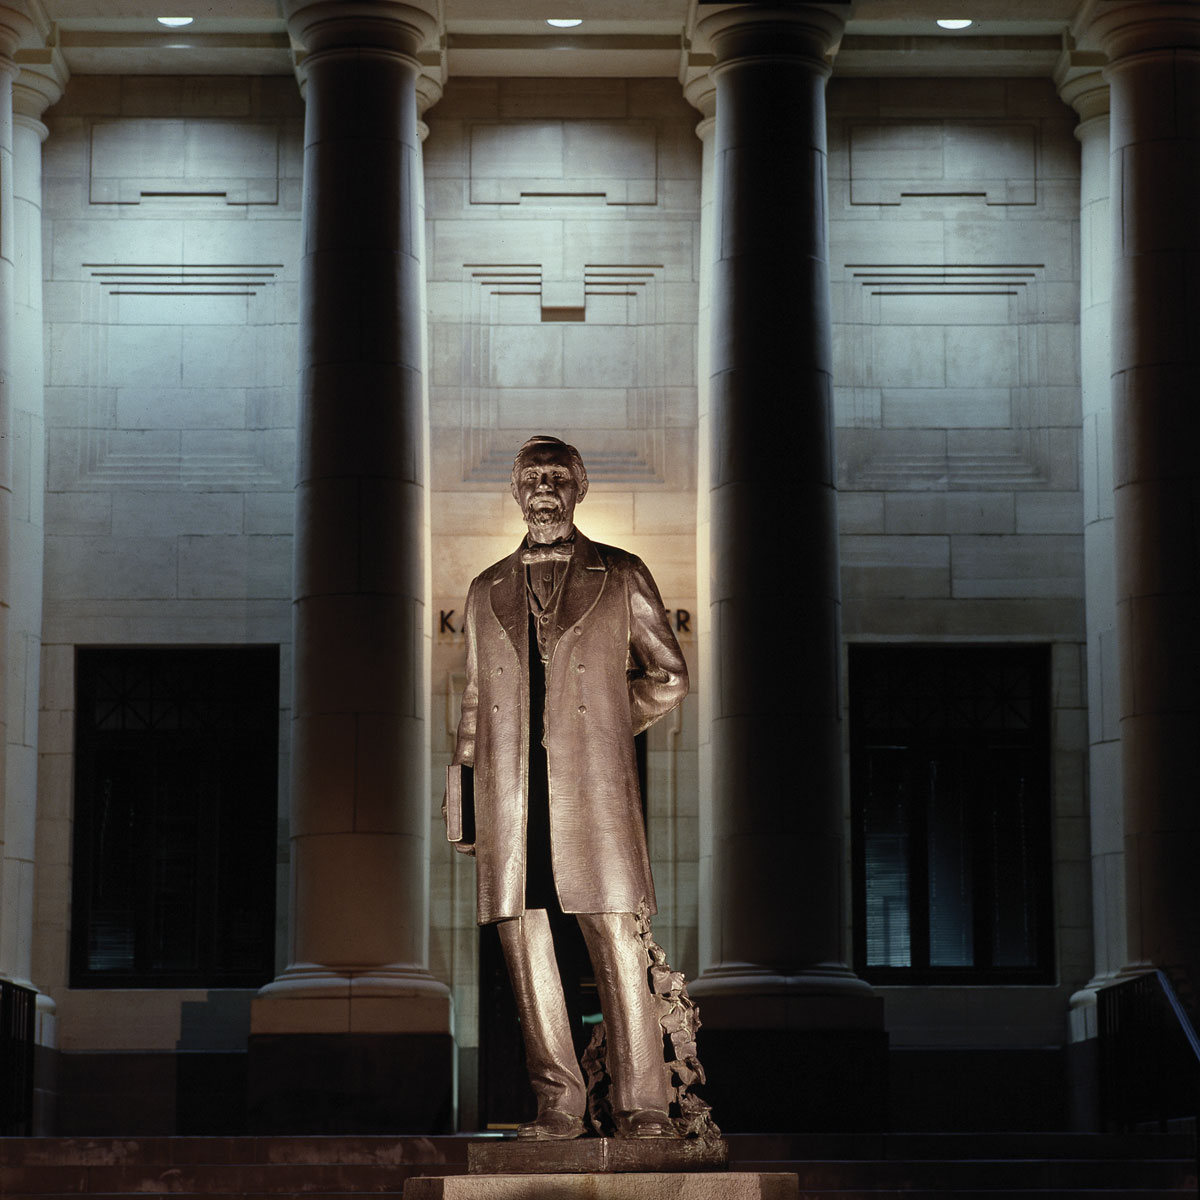 The Karl G. Maeser statue at night.